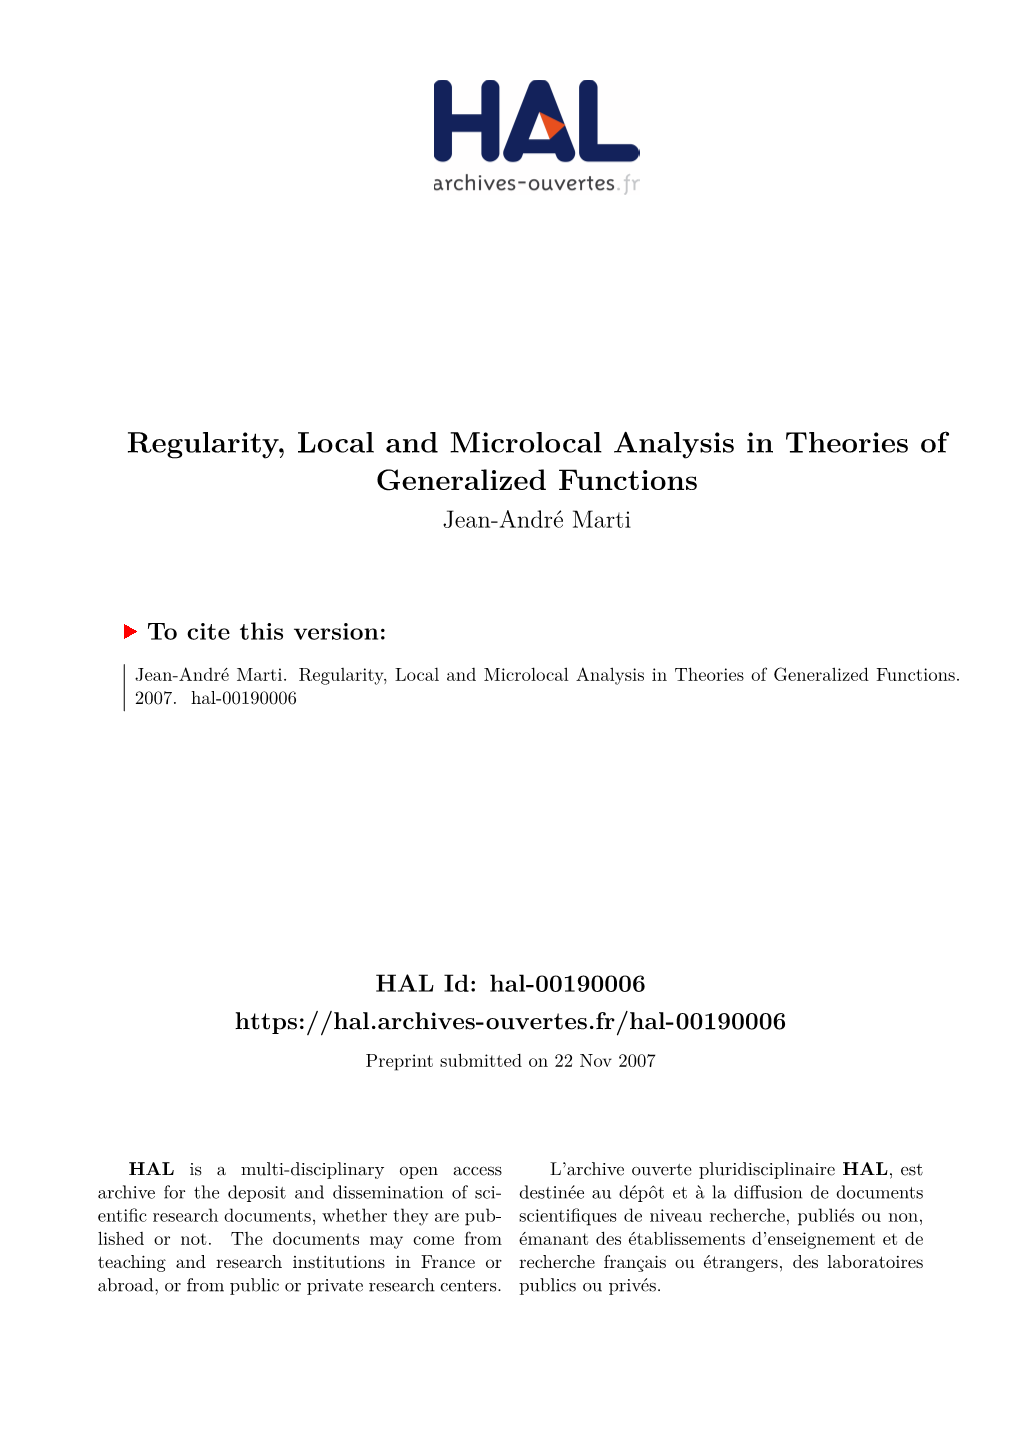 Regularity, Local and Microlocal Analysis in Theories of Generalized Functions Jean-André Marti